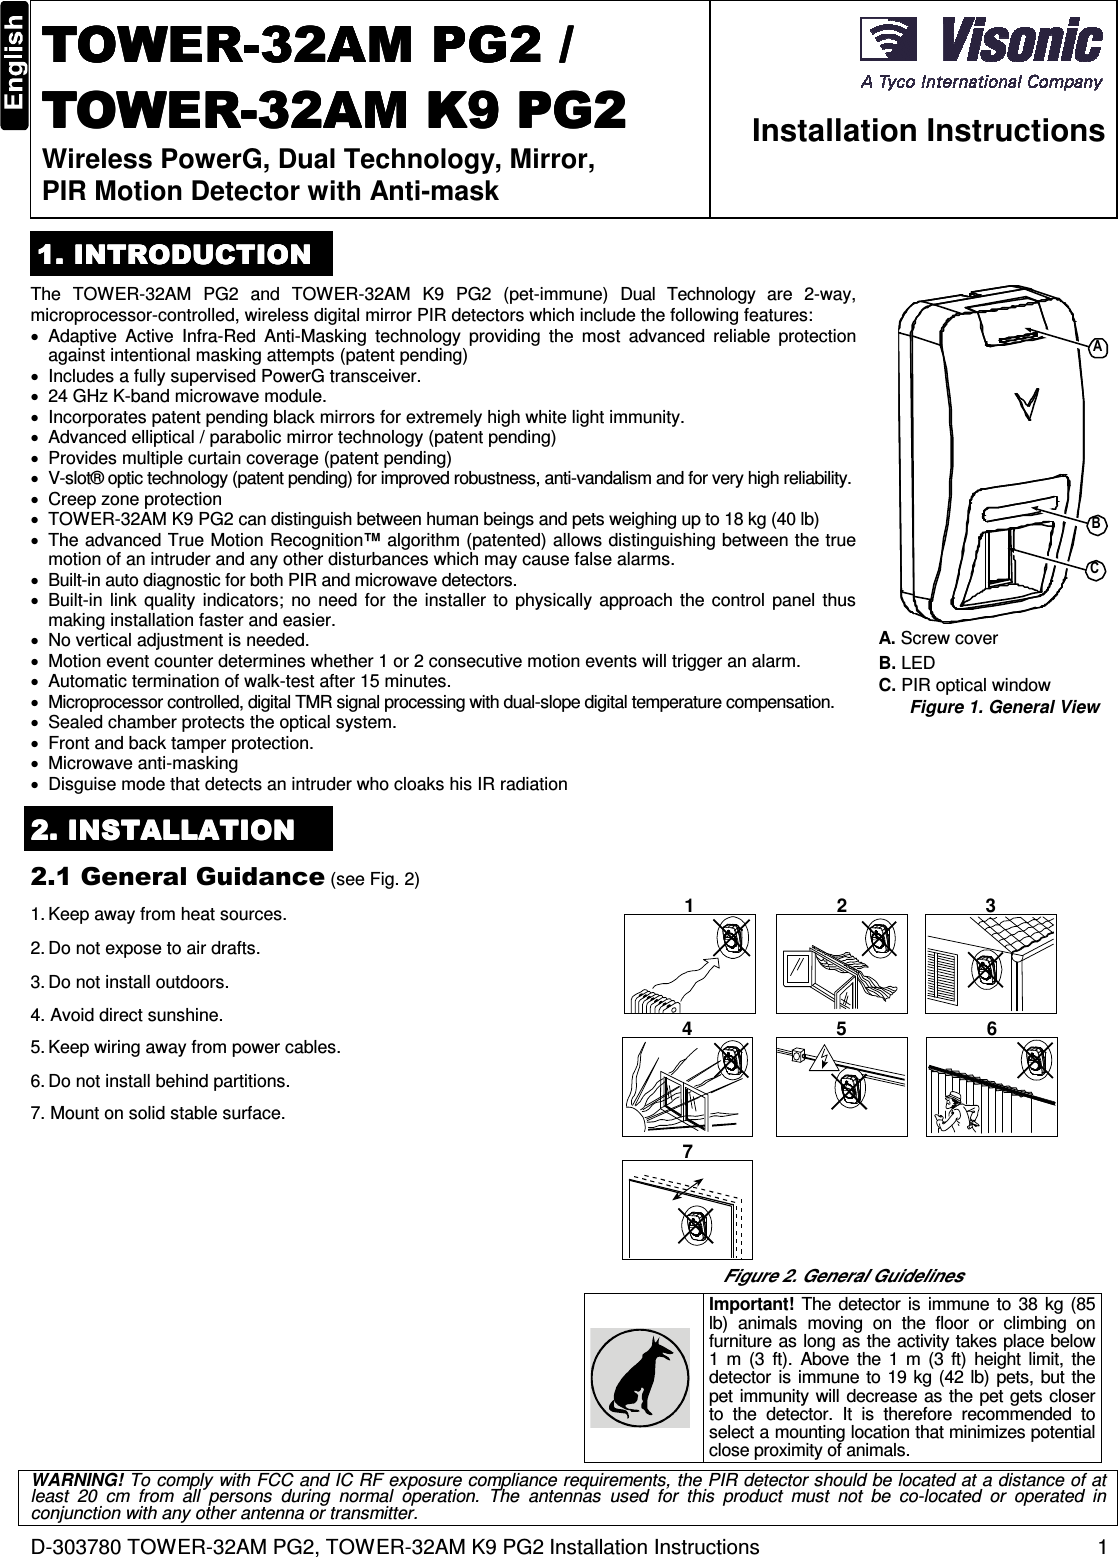 D-303780 TOWER-32AM PG2, TOWER-32AM K9 PG2 Installation Instructions  1  TOWERTOWERTOWERTOWER----32AM32AM32AM32AM    PG2 /PG2 /PG2 /PG2 /    TOWERTOWERTOWERTOWER----32AM32AM32AM32AM    K9 PG2K9 PG2K9 PG2K9 PG2    Wireless PowerG, Dual Technology, Mirror, PIR Motion Detector with Anti-mask  Installation Instructions 1. INTRODUCTION1. INTRODUCTION1. INTRODUCTION1. INTRODUCTION    The  TOWER-32AM  PG2  and  TOWER-32AM  K9  PG2  (pet-immune)  Dual  Technology  are  2-way, microprocessor-controlled, wireless digital mirror PIR detectors which include the following features: •  Adaptive  Active  Infra-Red  Anti-Masking  technology  providing  the  most  advanced  reliable  protection against intentional masking attempts (patent pending) •  Includes a fully supervised PowerG transceiver. •  24 GHz K-band microwave module. •  Incorporates patent pending black mirrors for extremely high white light immunity. •  Advanced elliptical / parabolic mirror technology (patent pending) •  Provides multiple curtain coverage (patent pending) •  V-slot® optic technology (patent pending) for improved robustness, anti-vandalism and for very high reliability. •  Creep zone protection •  TOWER-32AM K9 PG2 can distinguish between human beings and pets weighing up to 18 kg (40 lb) •  The advanced True Motion Recognition™ algorithm (patented) allows distinguishing between the true motion of an intruder and any other disturbances which may cause false alarms. •  Built-in auto diagnostic for both PIR and microwave detectors. •  Built-in link  quality  indicators;  no need for  the installer  to physically  approach the control panel thus making installation faster and easier. •  No vertical adjustment is needed. •  Motion event counter determines whether 1 or 2 consecutive motion events will trigger an alarm. •  Automatic termination of walk-test after 15 minutes. •  Microprocessor controlled, digital TMR signal processing with dual-slope digital temperature compensation. •  Sealed chamber protects the optical system. •  Front and back tamper protection. •  Microwave anti-masking • Disguise mode that detects an intruder who cloaks his IR radiation CBA A. Screw cover B. LED  C. PIR optical window Figure 1. General View 2222. . . . INSTALLATIONINSTALLATIONINSTALLATIONINSTALLATION    2.1 General Guidance (see Fig. 2) 1. Keep away from heat sources. 2. Do not expose to air drafts. 3. Do not install outdoors. 4. Avoid direct sunshine. 5. Keep wiring away from power cables. 6. Do not install behind partitions. 7. Mount on solid stable surface. 1 2 34 5 67 Figure 2. General Guidelines  Important!  The detector is immune to 38 kg (85 lb)  animals  moving  on  the  floor  or  climbing  on furniture as long as the activity takes place below 1  m  (3  ft).  Above  the  1  m  (3  ft)  height limit, the detector is immune to 19 kg (42 lb) pets, but the pet immunity will decrease as the pet gets closer to  the  detector.  It  is  therefore  recommended  to select a mounting location that minimizes potential close proximity of animals.    WARNING! To comply with FCC and IC RF exposure compliance requirements, the PIR detector should be located at a distance of at least  20  cm  from  all  persons  during  normal  operation.  The  antennas  used  for  this  product  must  not  be  co-located  or  operated  in conjunction with any other antenna or transmitter. 